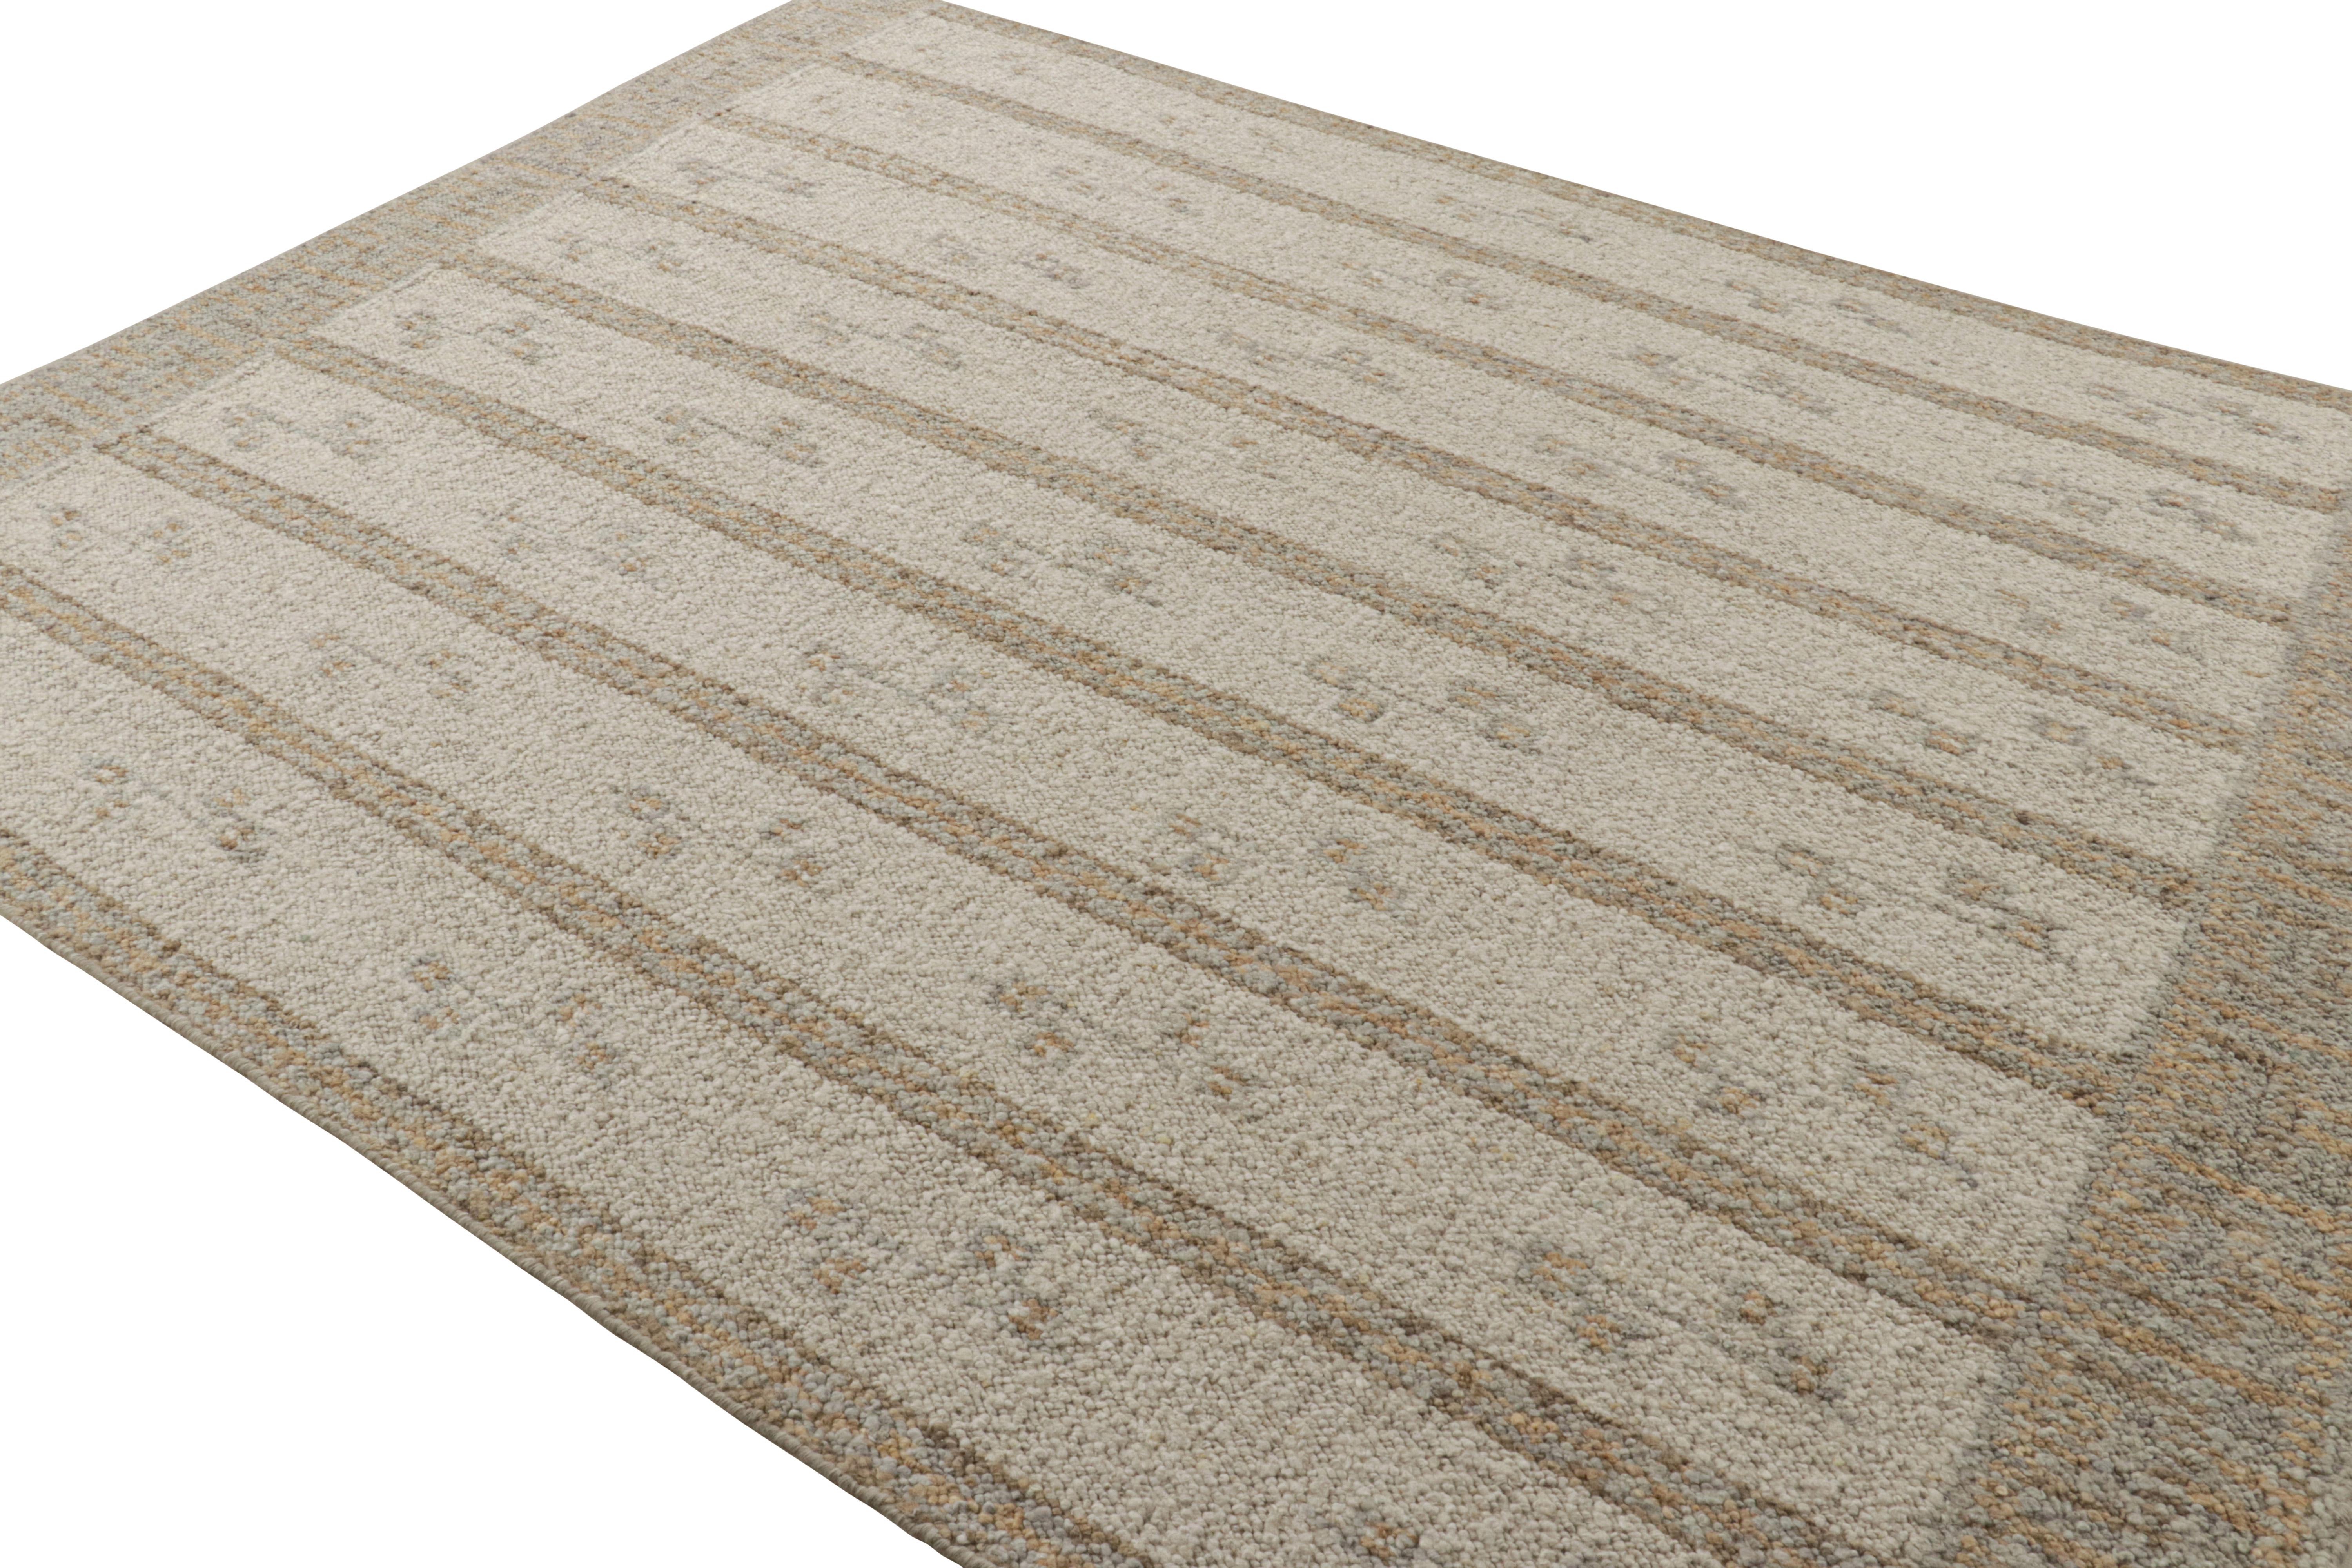 Indian Rug & Kilim’s Scandinavian Style Rug in White & Beige-Brown Stripes and Geometry For Sale